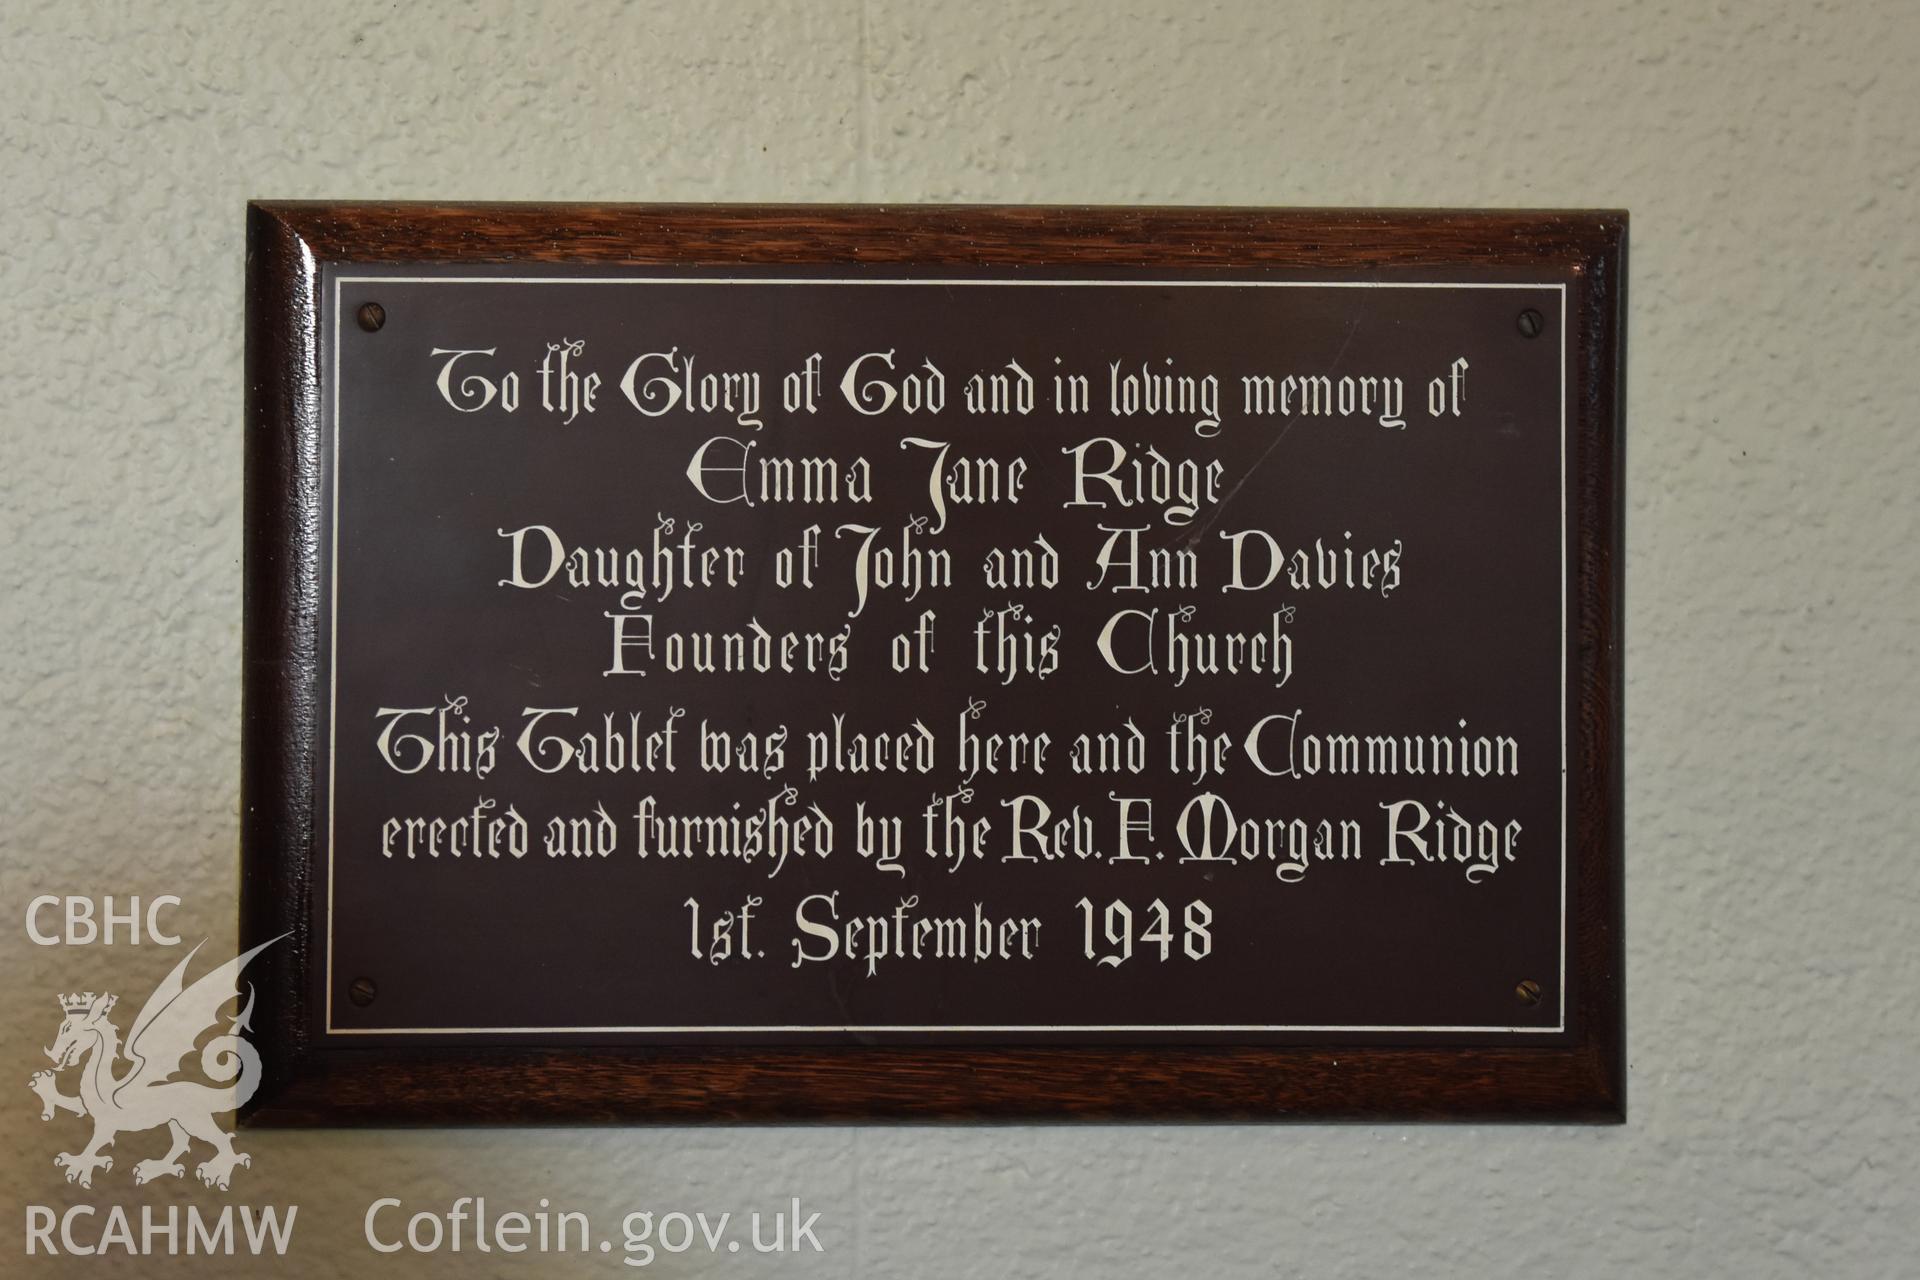 Memorial plaque to Emma Jane Ridge, the daughter of John and Ann Davies who were founders of Hyssington Primitive Methodist Chapel, Hyssington, Churchstoke. Photographic survey conducted by Sue Fielding on 7th December 2018.